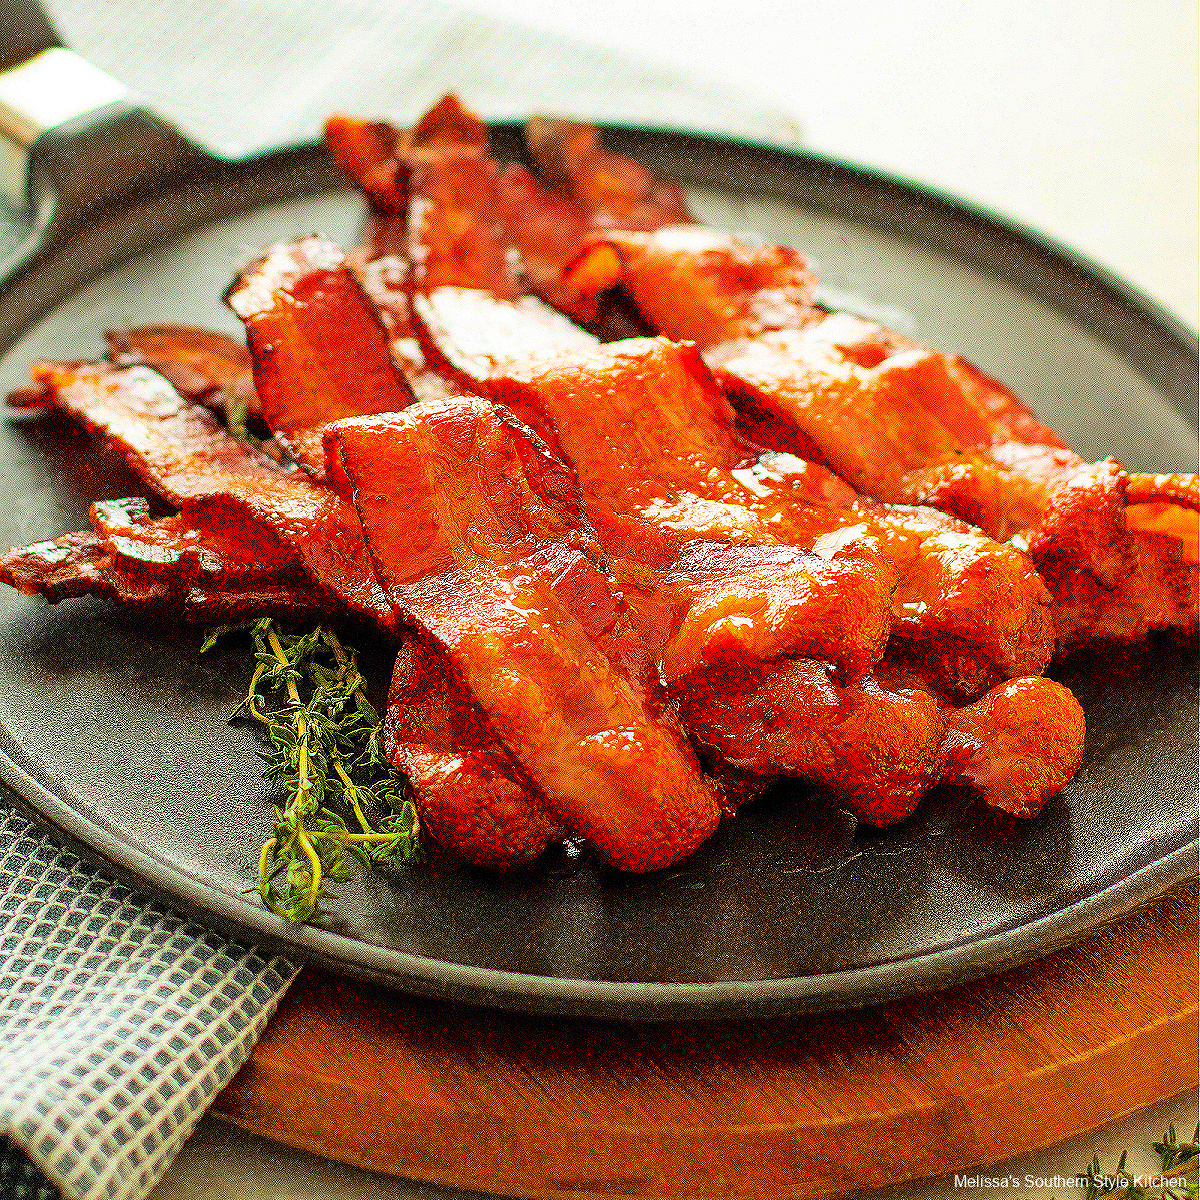 Easy Oven Bacon: How to Cook Bacon in the Oven - Renee Nicole's Kitchen